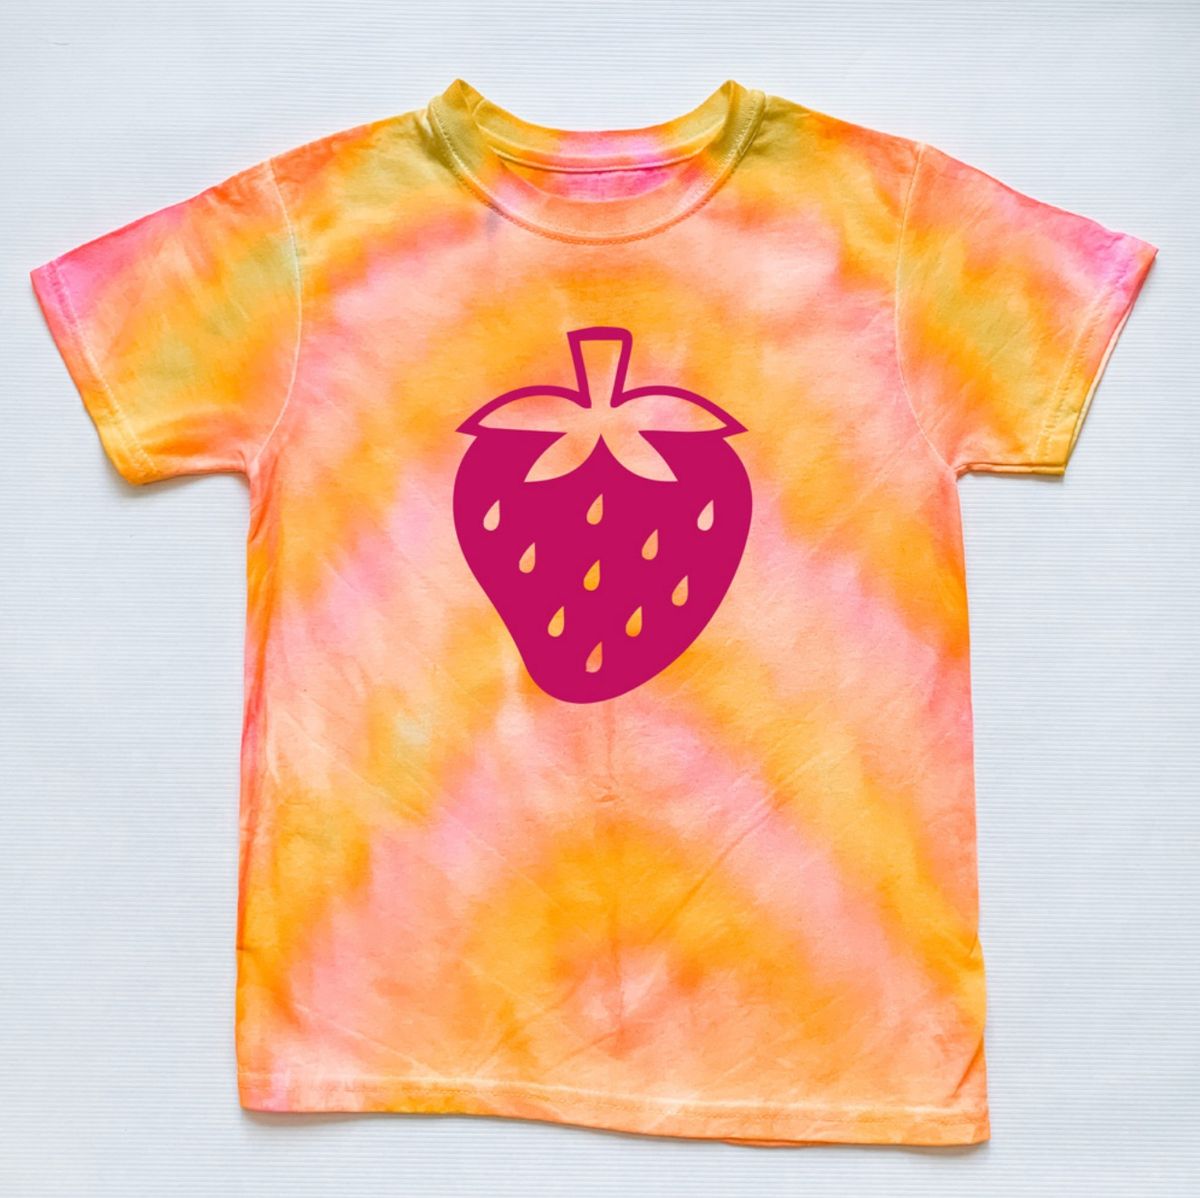 1 DAY YOUTH SUMMER ART SESSION -TIE DYE T SHIRT